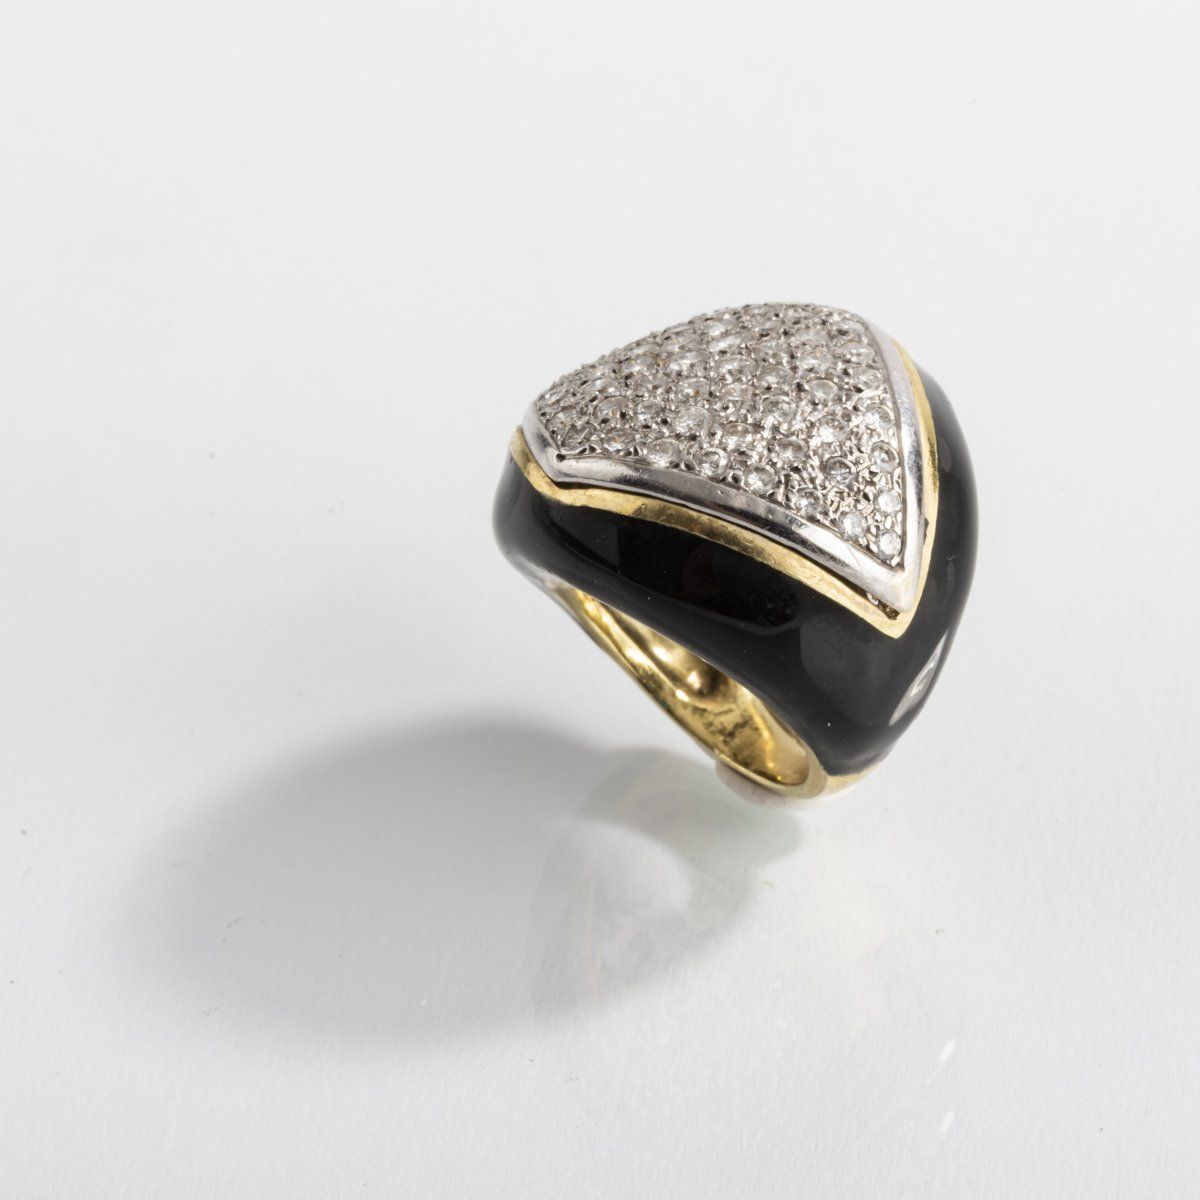 Null Italy, Ring, 1980s, 18ct. Yellow and white gold, diamonds, enamel. 22 grams&hellip;